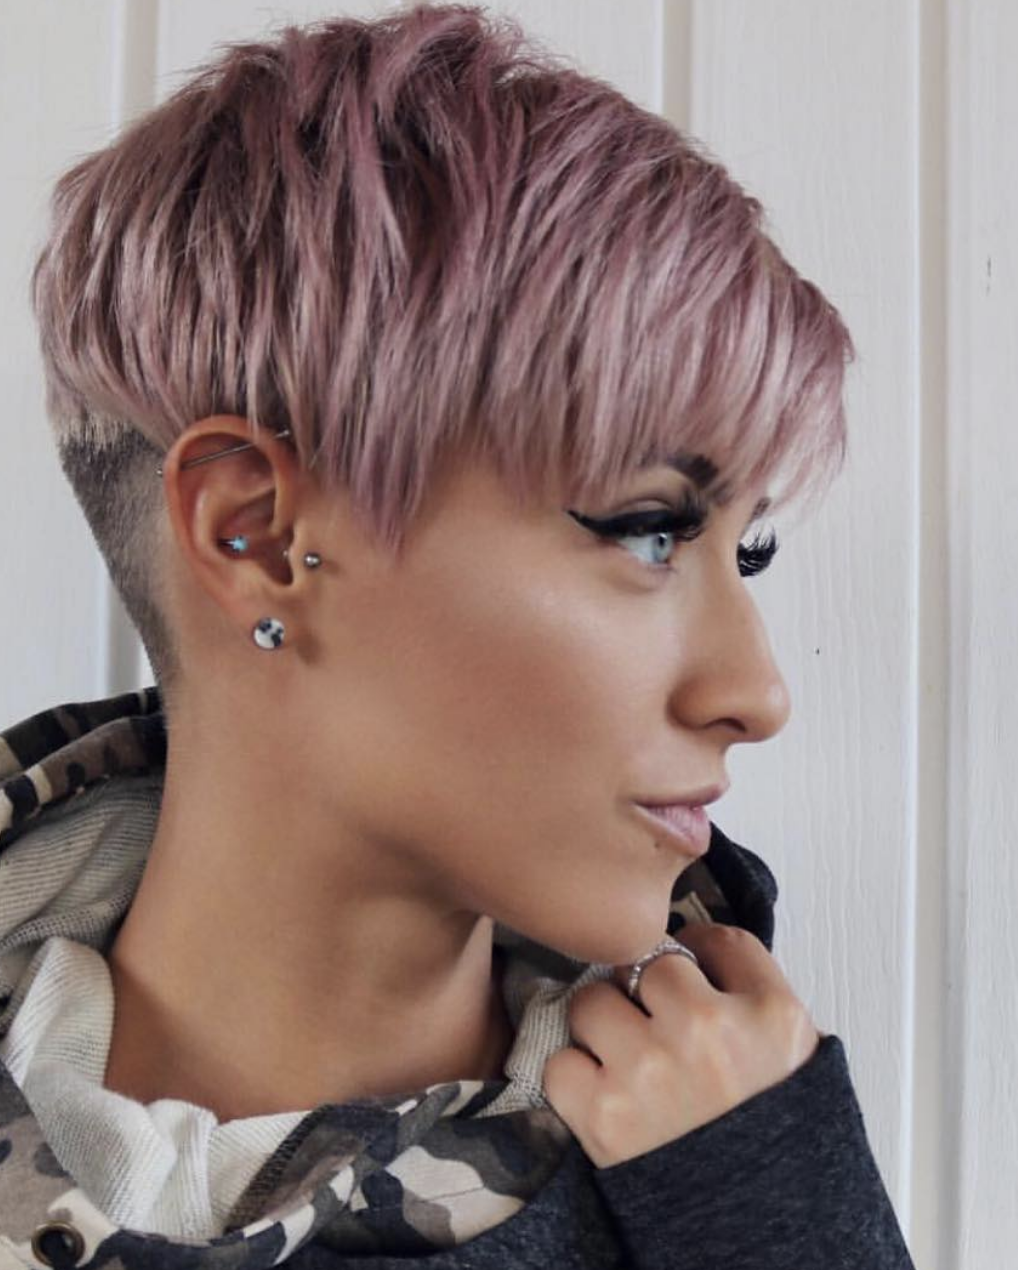 30 Best Pixie Short Haircuts Gallery 2019 LatestHairstylePedia